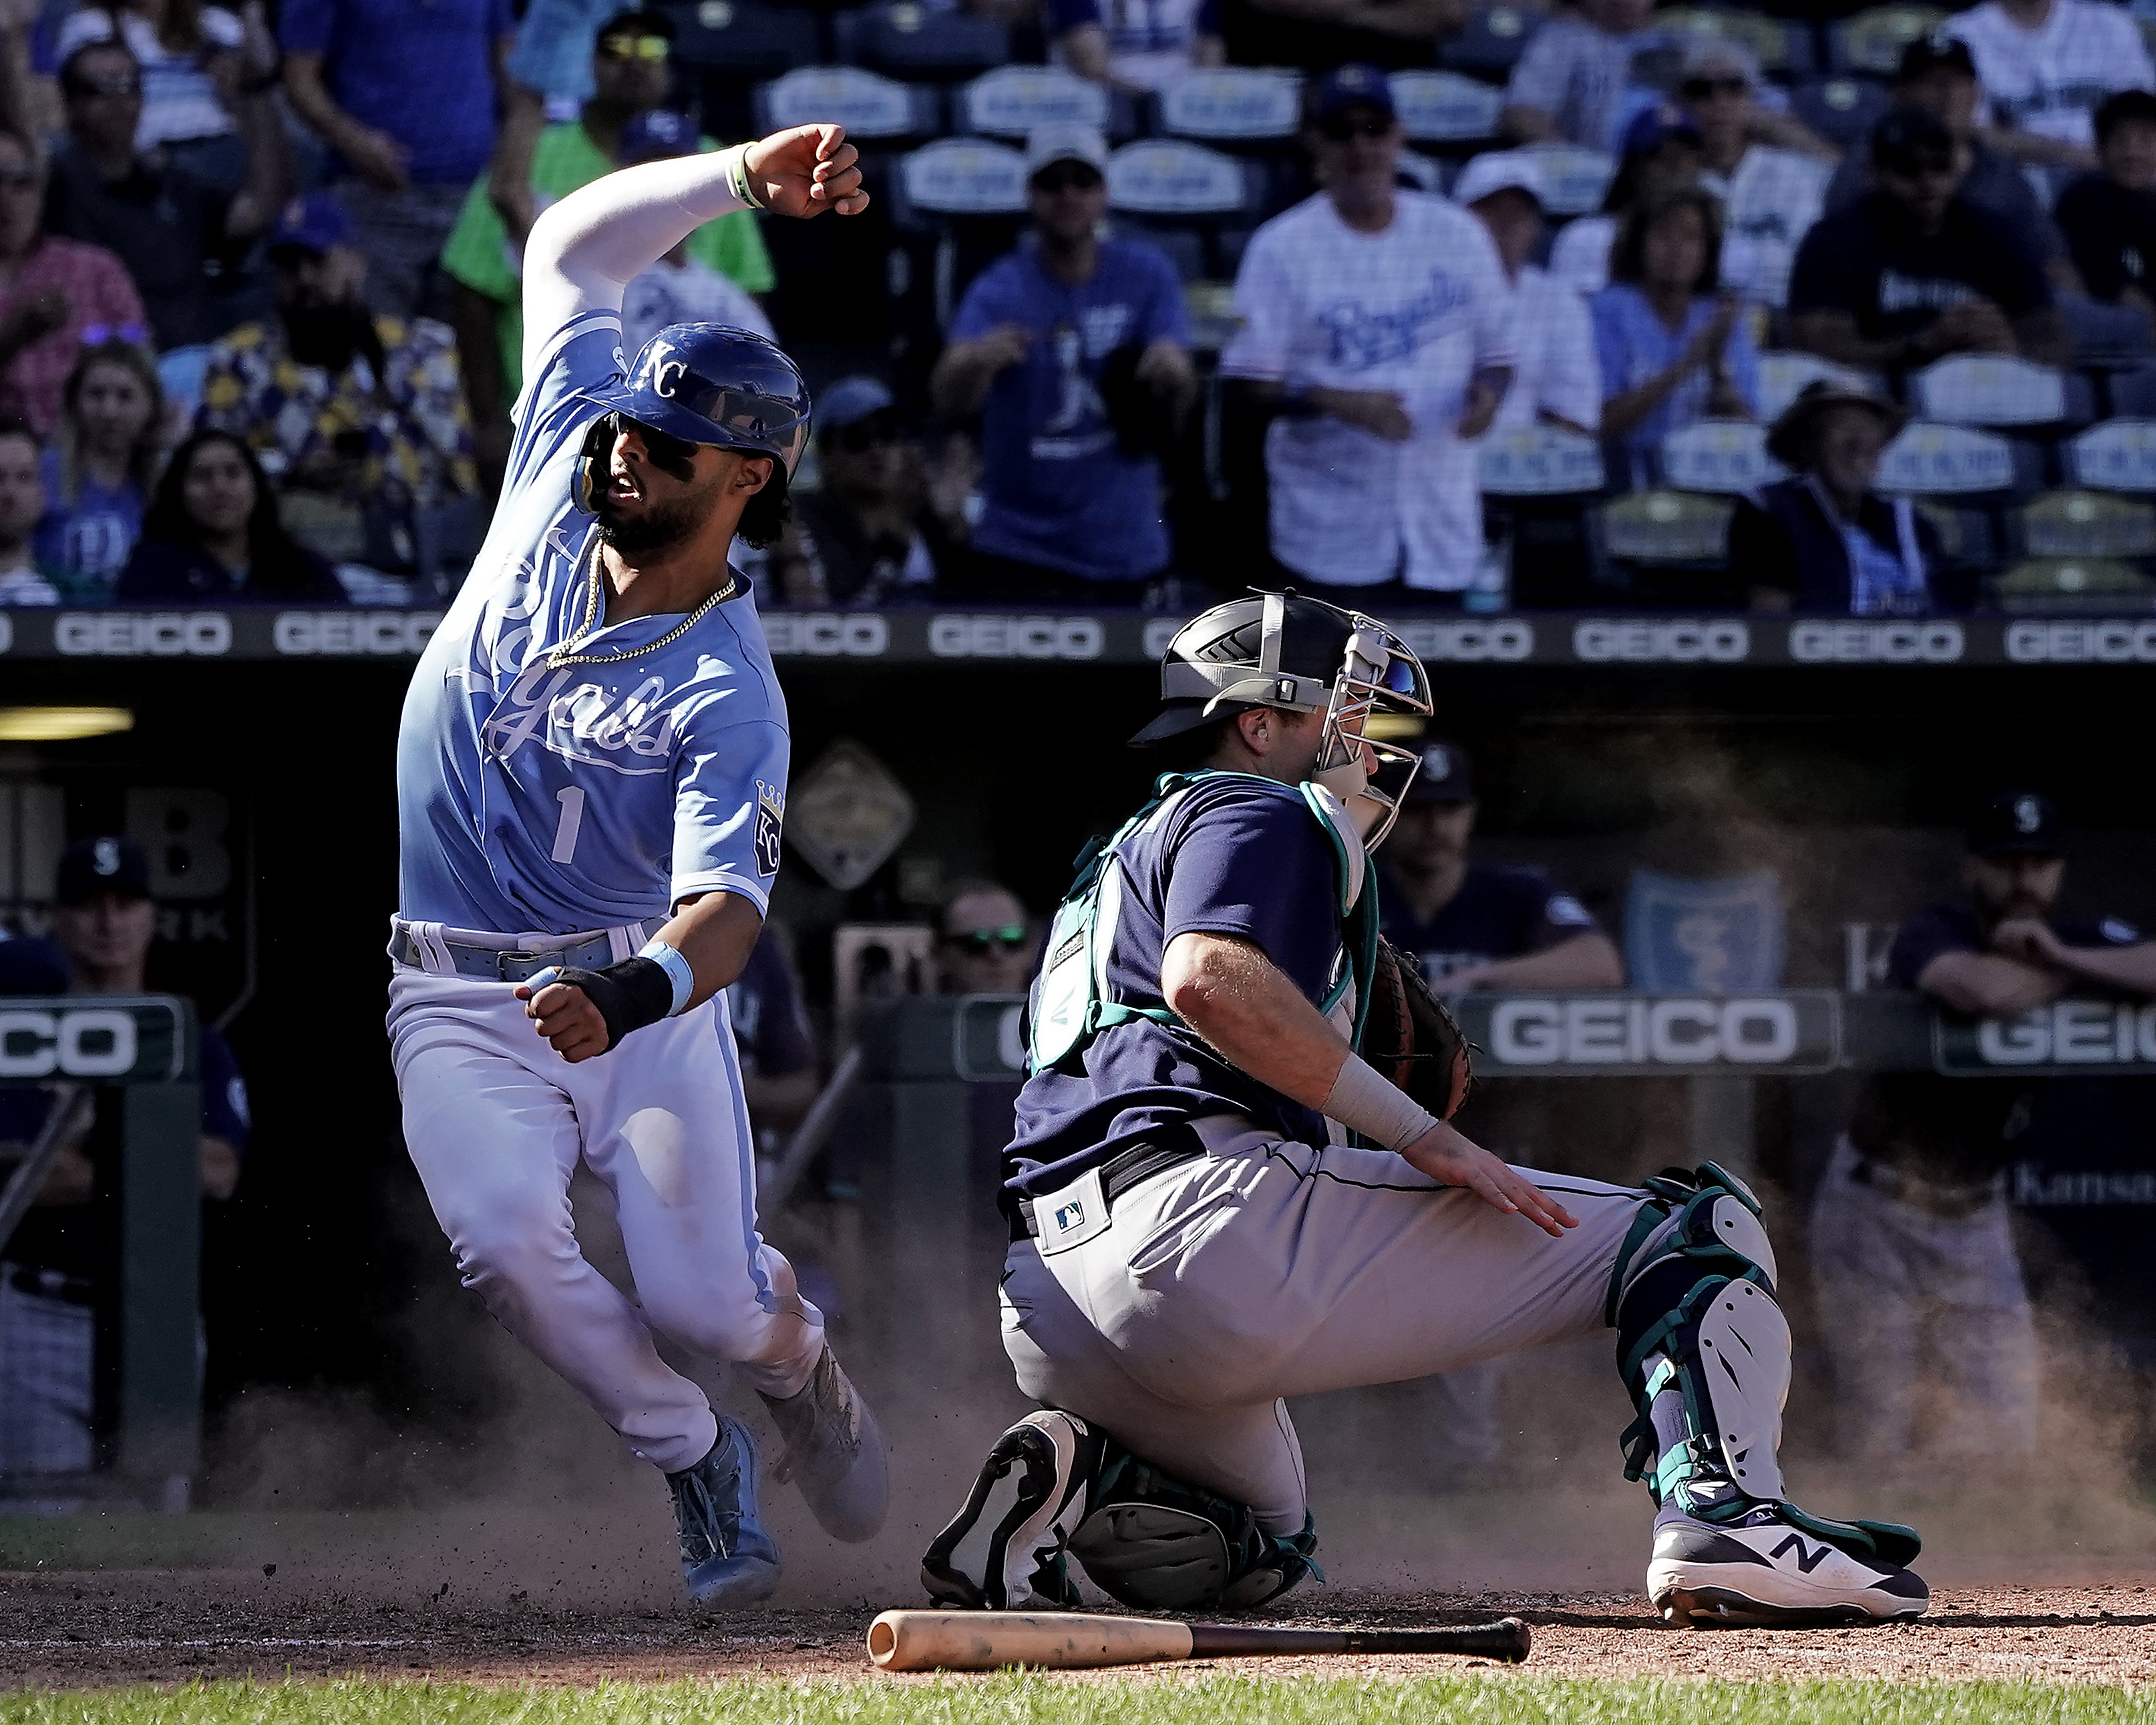 The Kansas City Royals erupt for 9 runs in the 1st inning! 